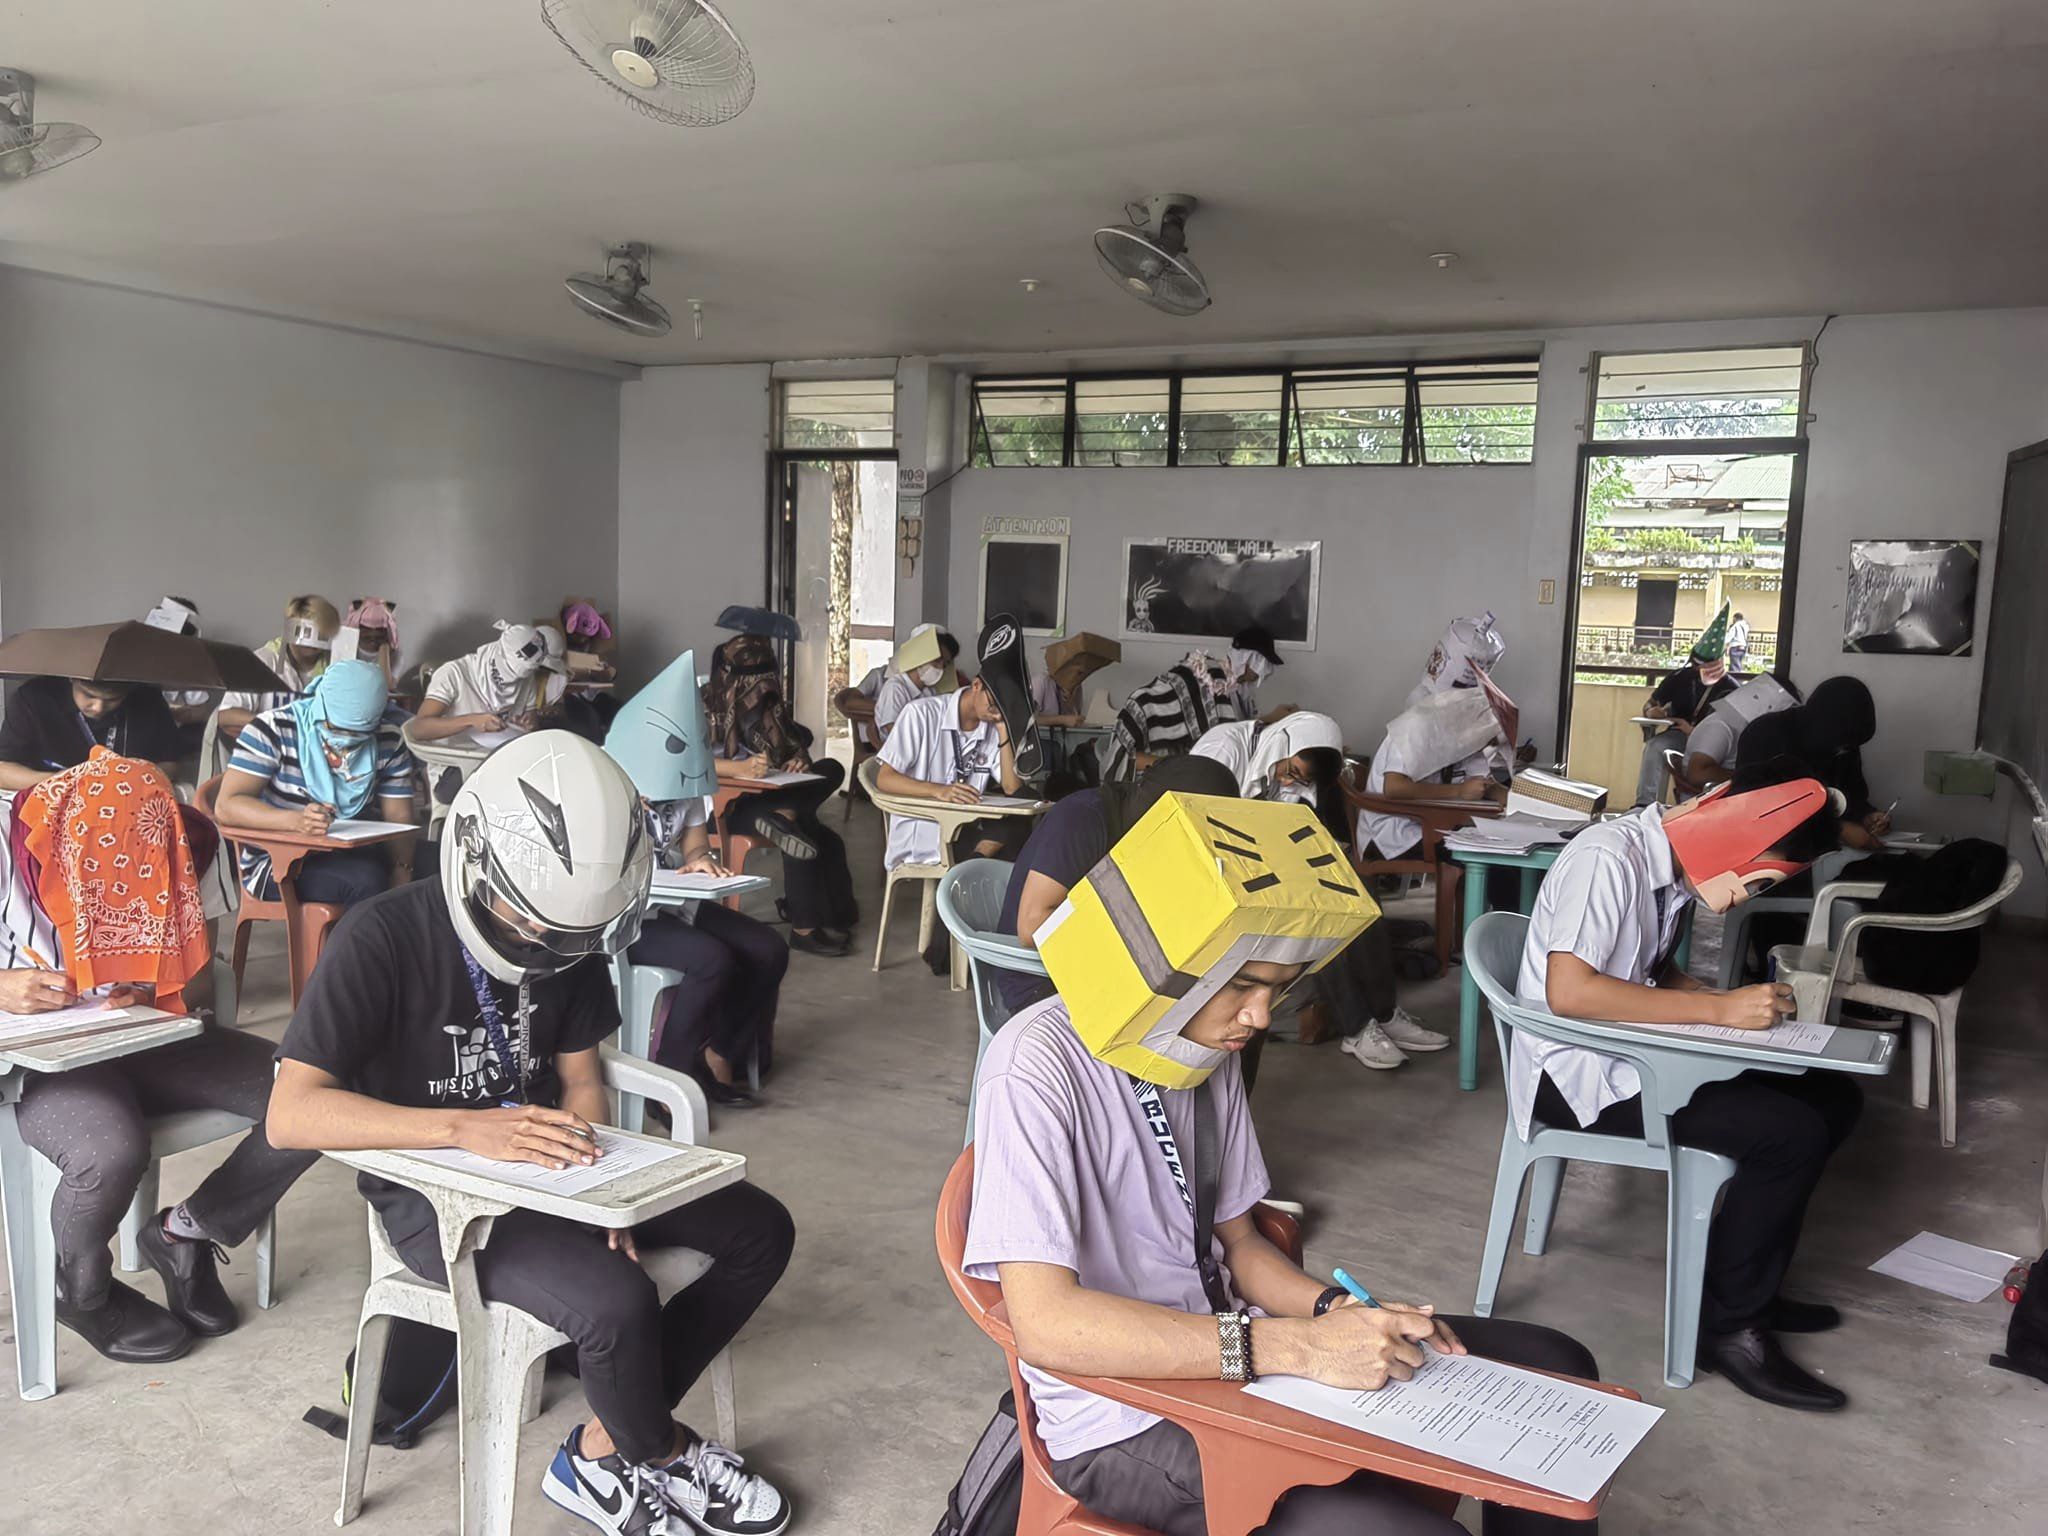 This Philippine Professor Asked Her Students To Make “Anti-Cheating” Hats For An Exam And They Delivered